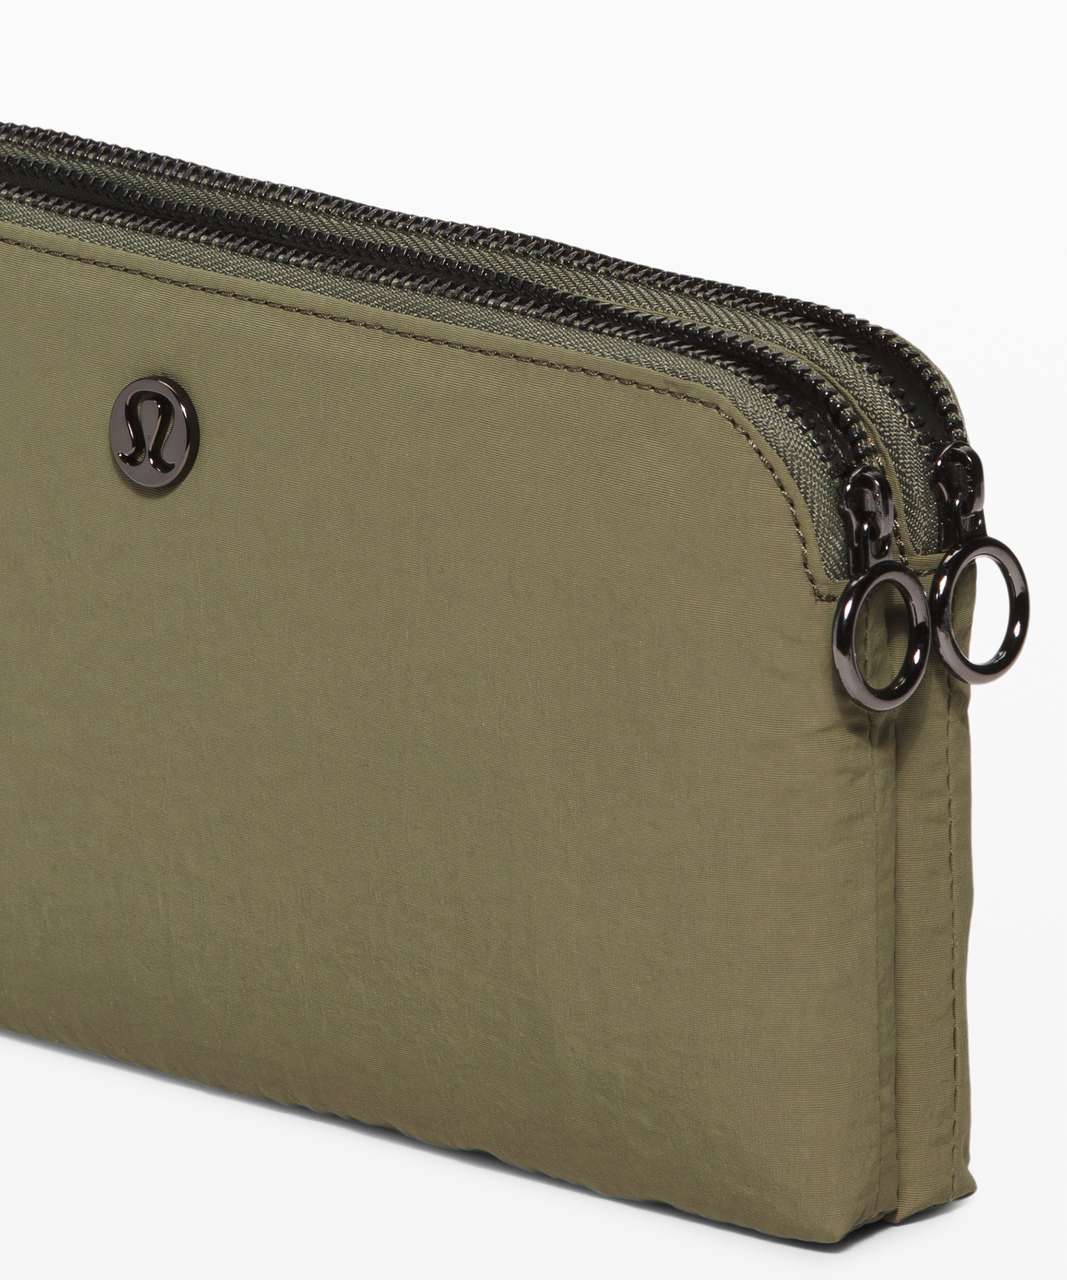 Lululemon Now and Always Pouch - Medium Olive